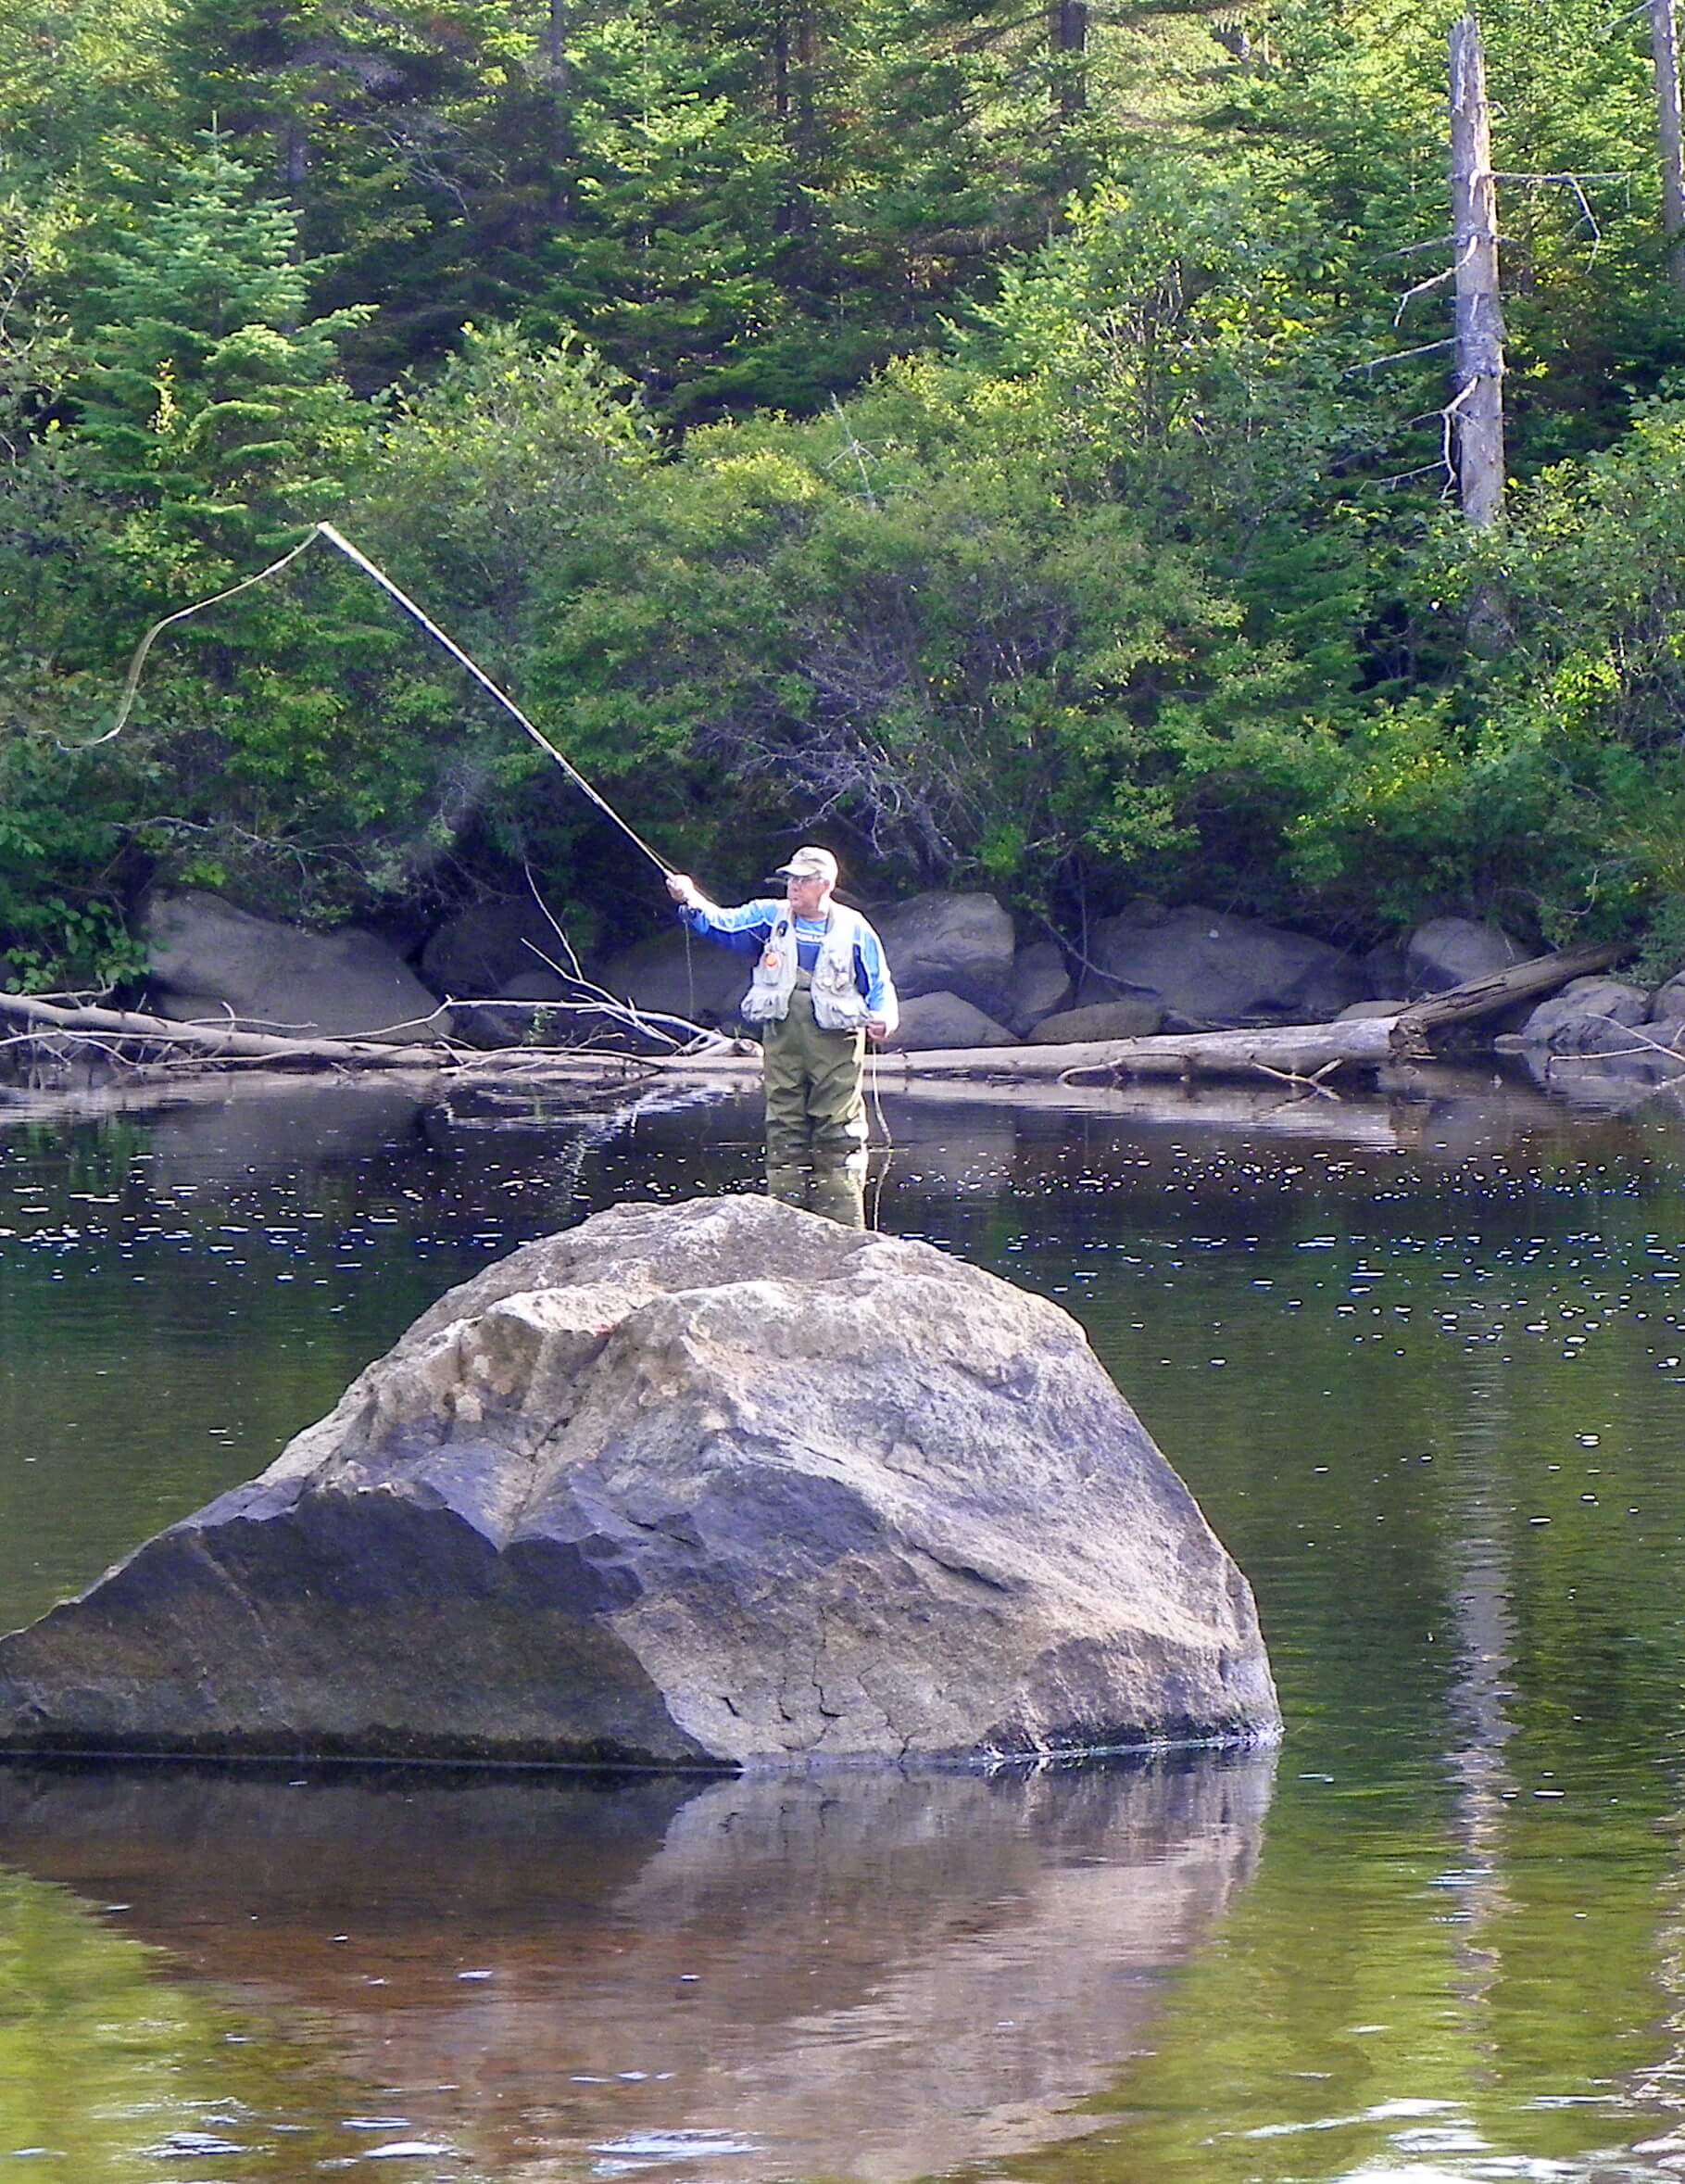 Trout fishing in the middle of the River